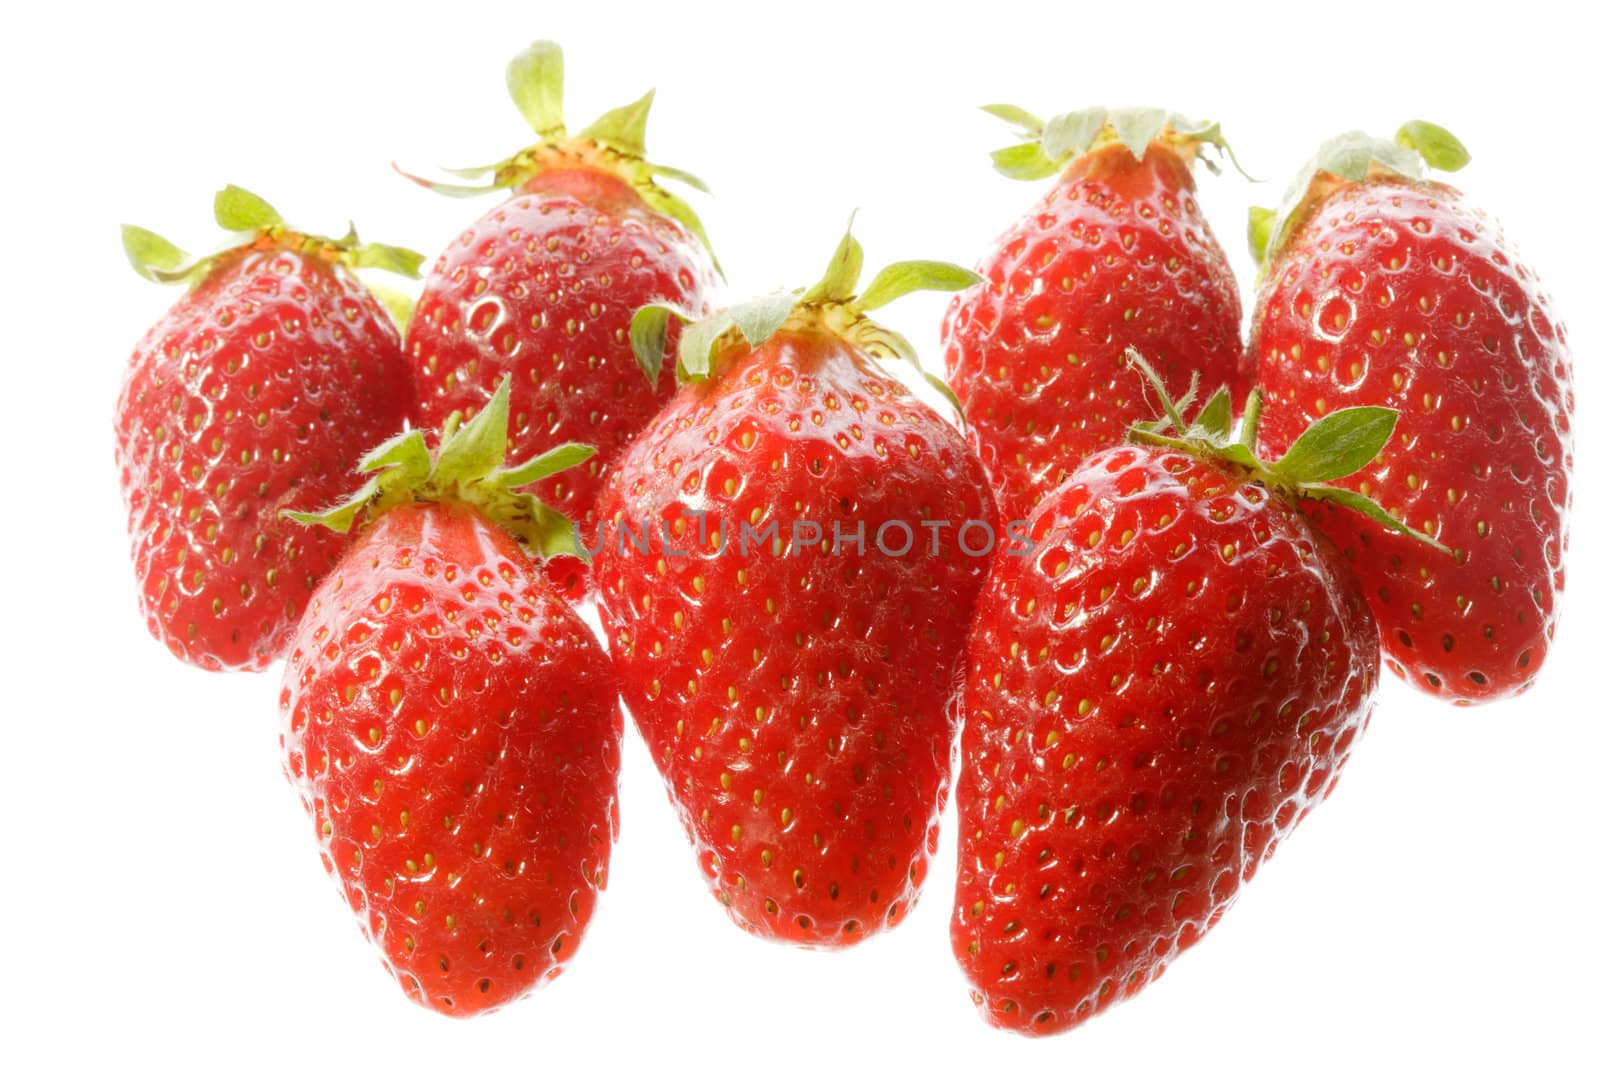 Red strawberries by ecobo